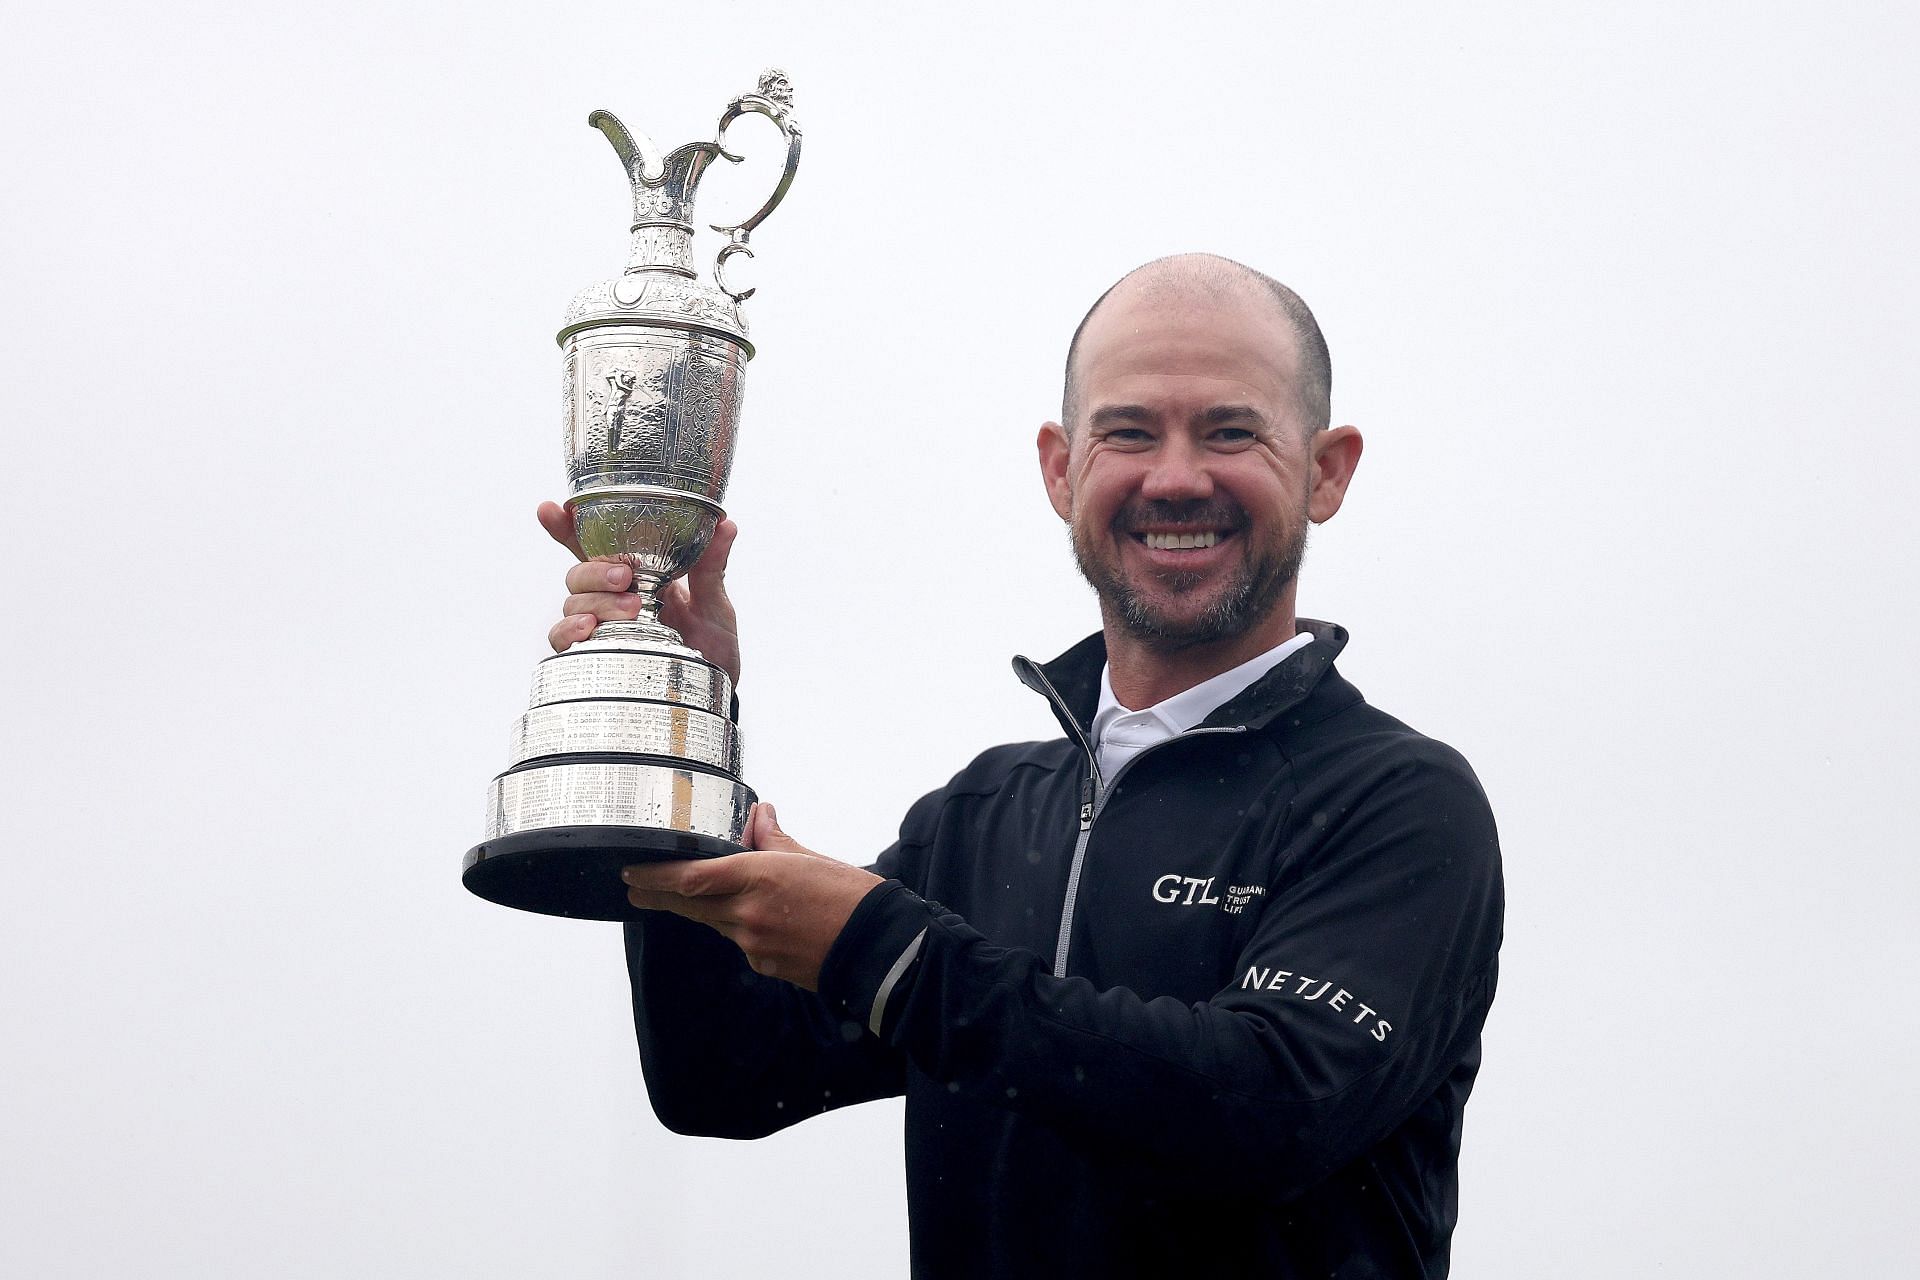 Brian Harman holding the Claret Jug (via Getty Images)